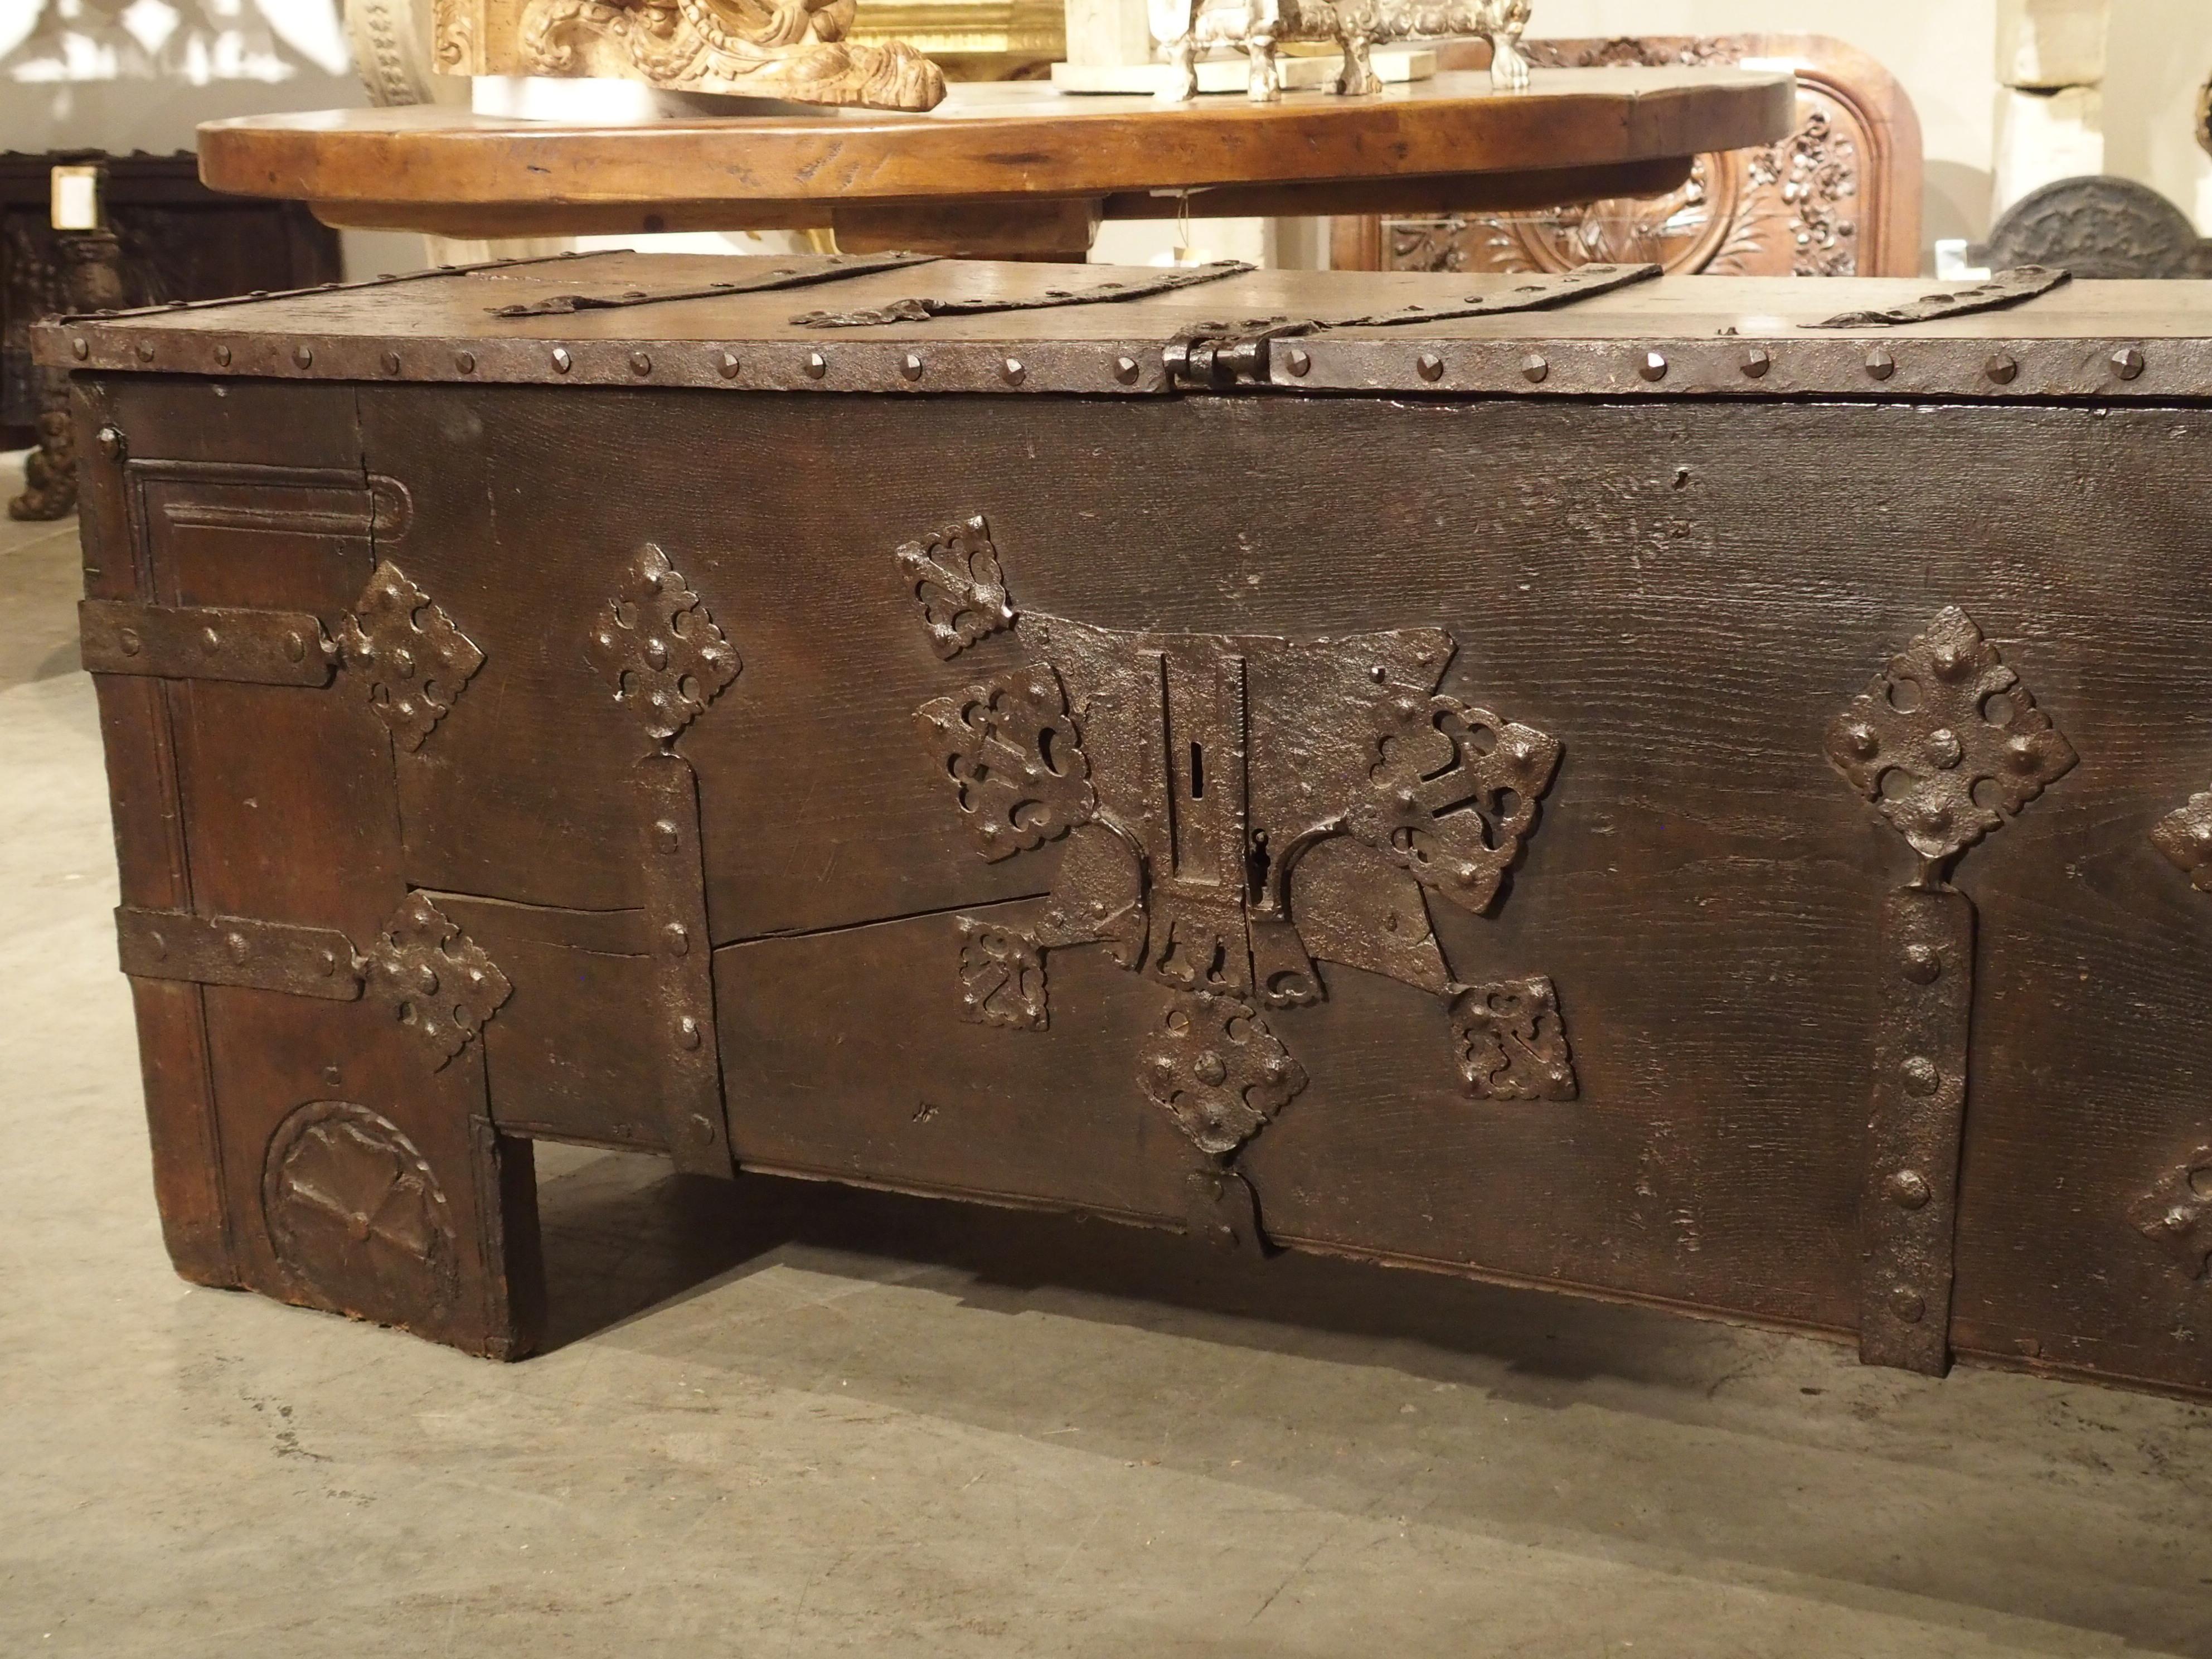 18th Century and Earlier Rare 16th Century Oak and Iron “Stollentruhe” Trunk from Westphalia, Germany